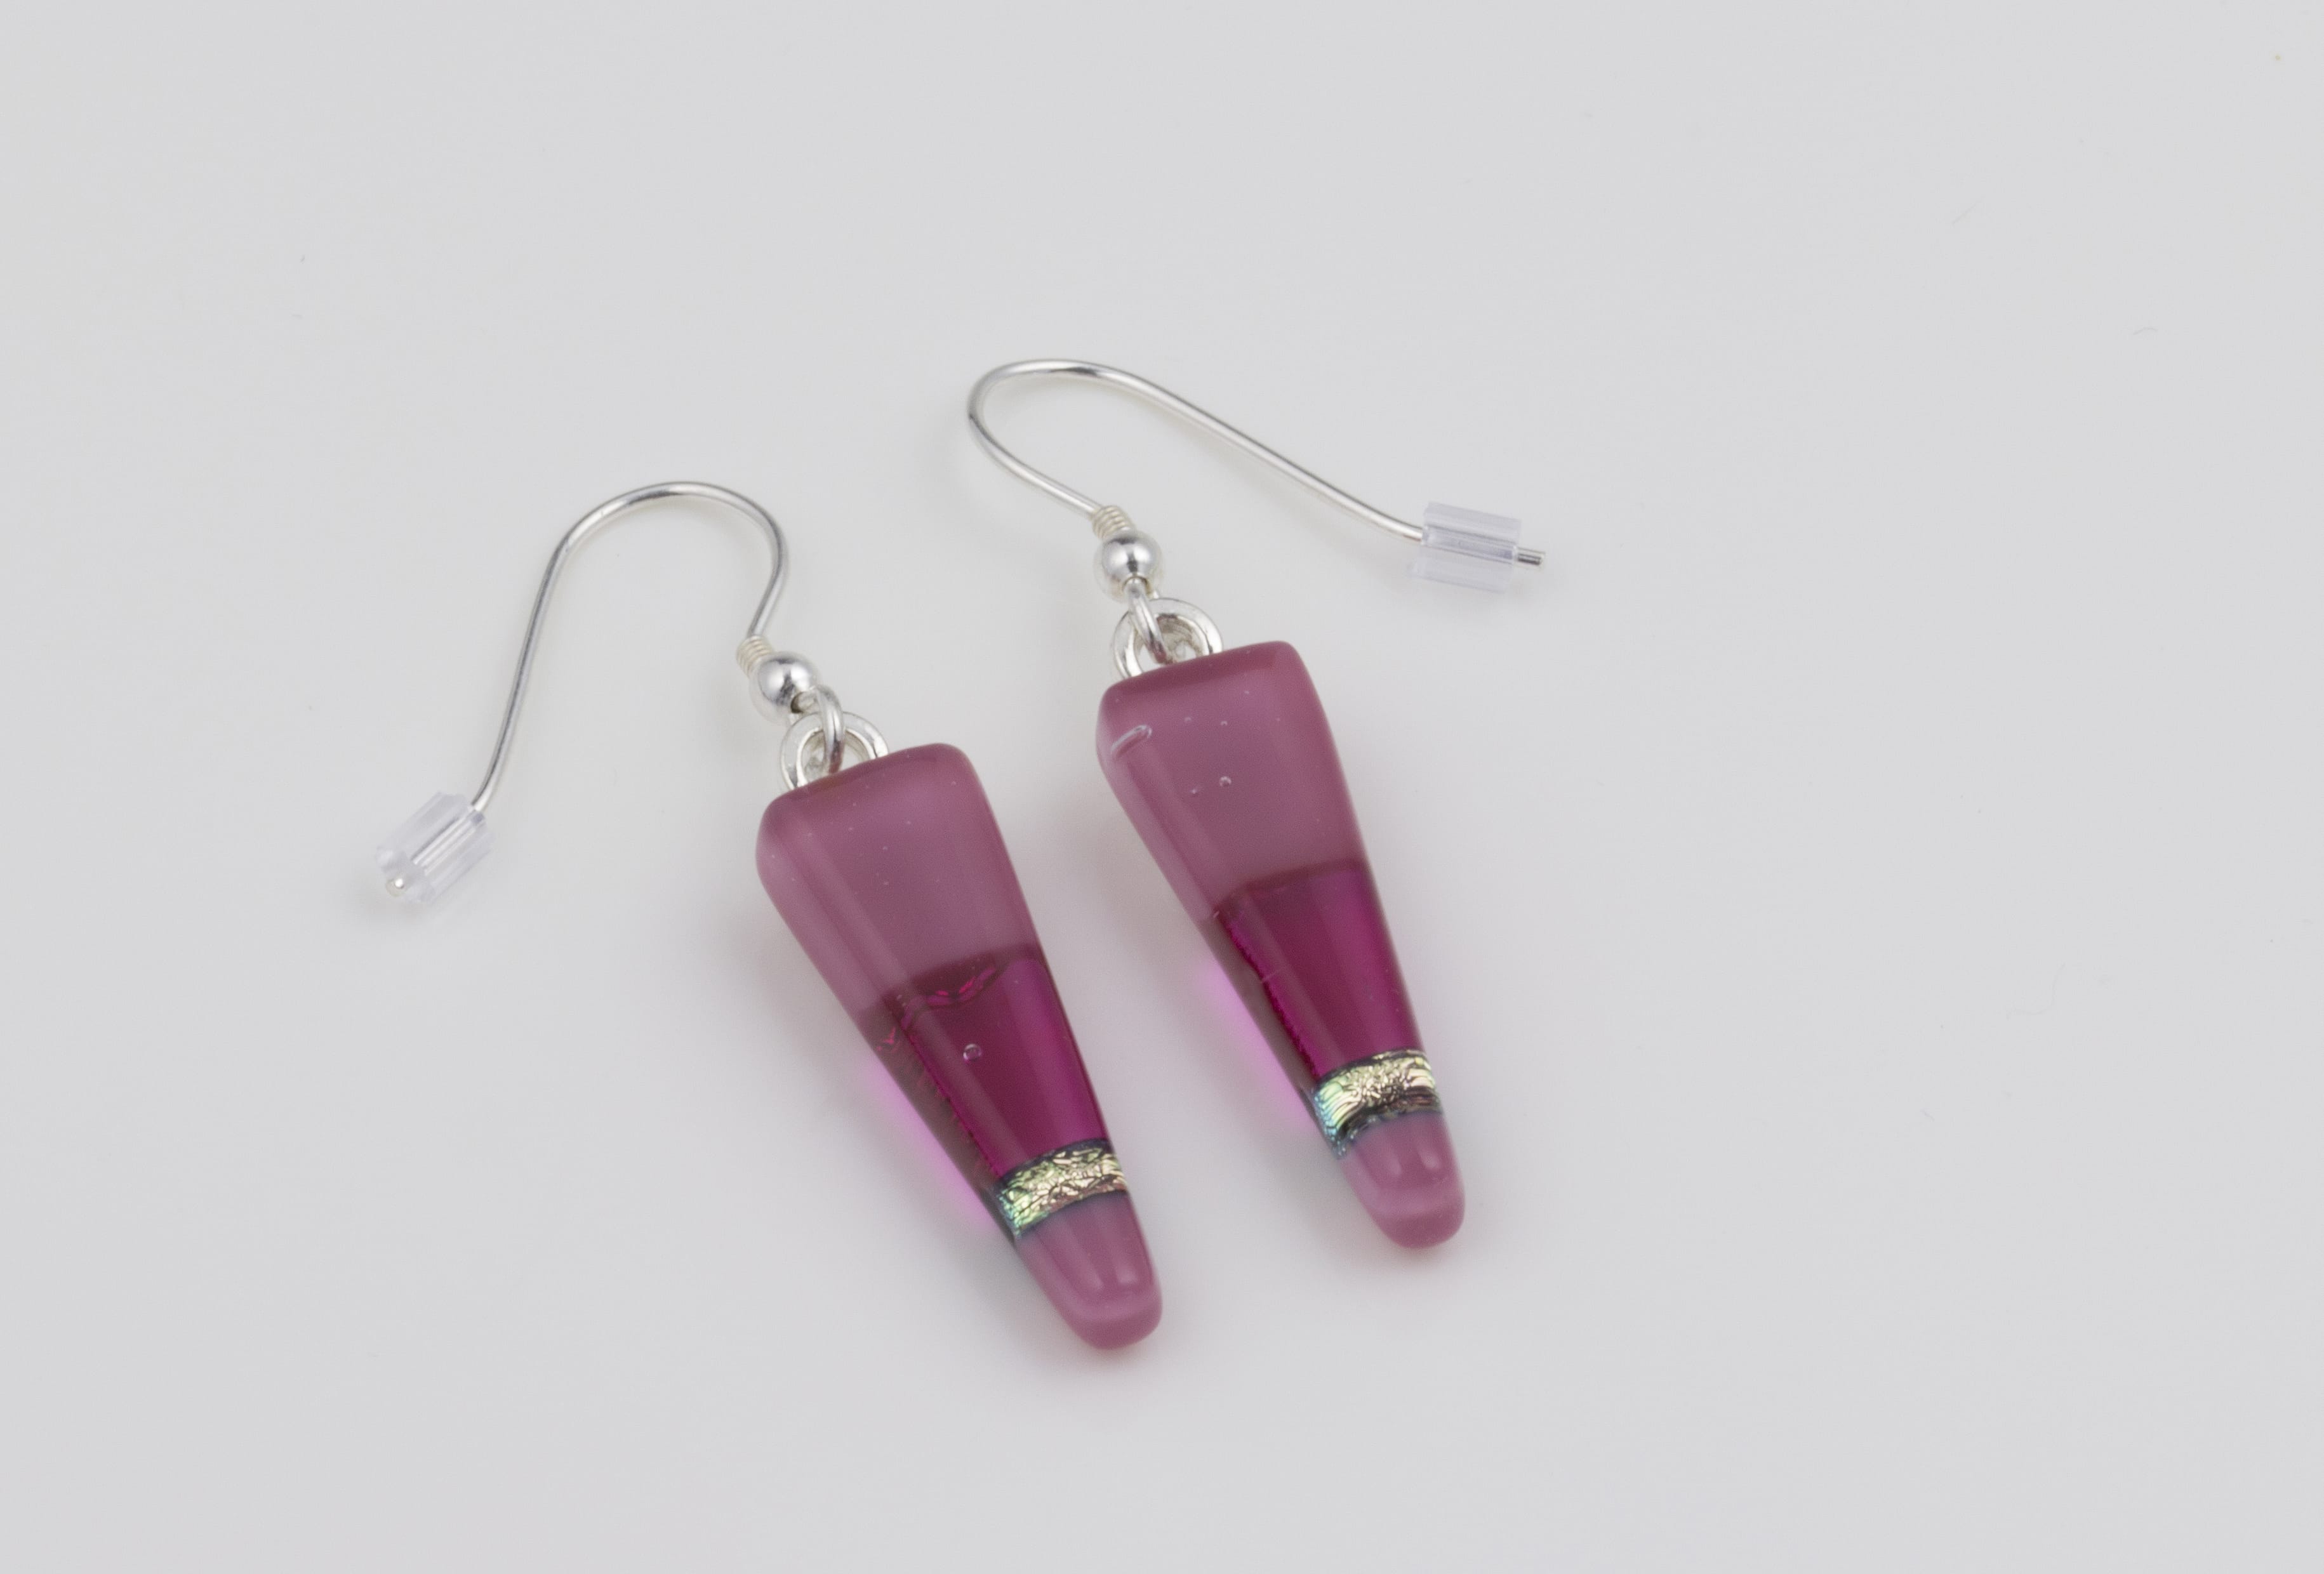 Dichroic glass jewellery, glass drop earrings, tapered pink earrings with transparent, opaque and dichroic glass, art glass earrings handmade in Shropshire, sterling silver hooks